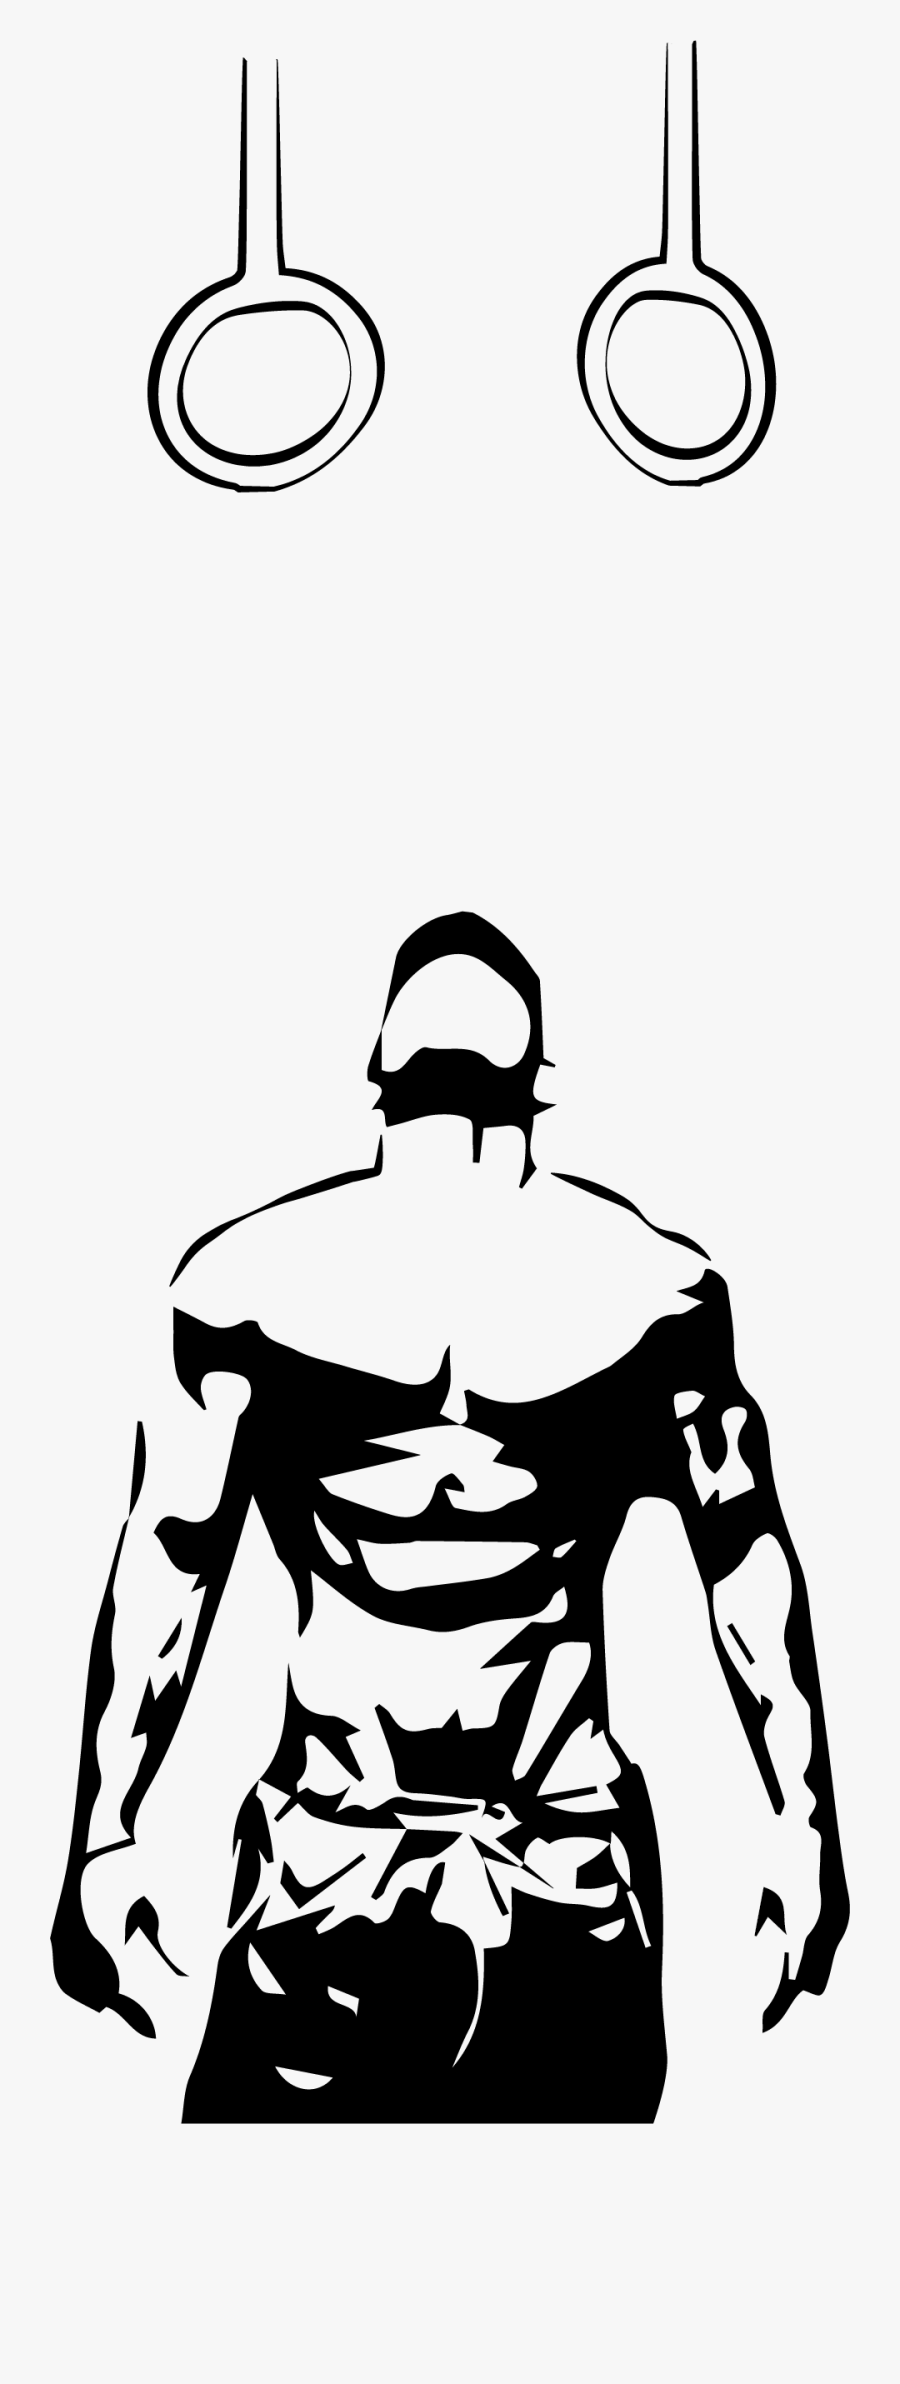 Crossfit Drawing, Transparent Clipart